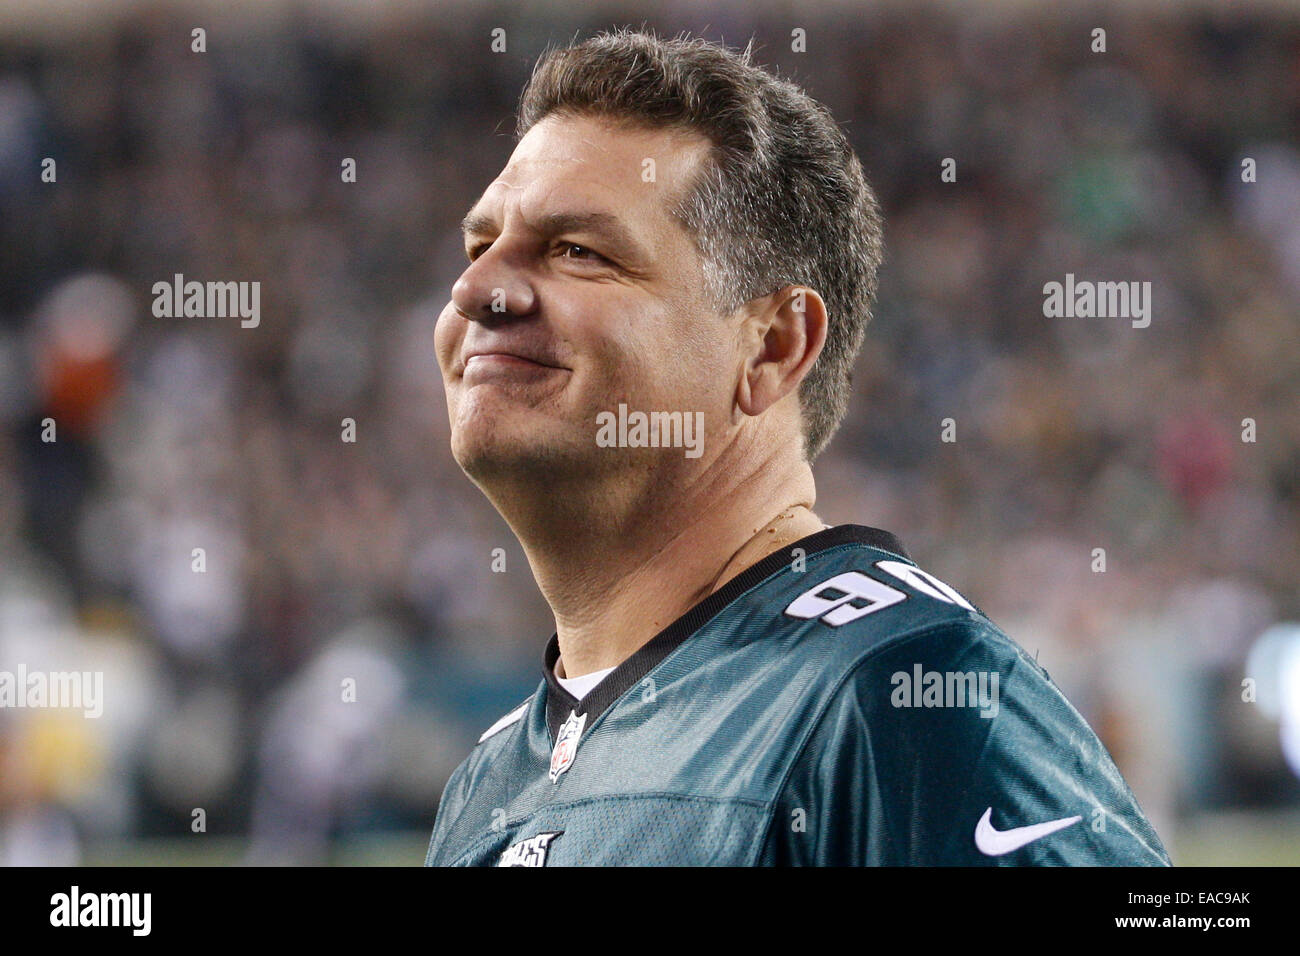 November 10, 2014: ESPN host Mike Golic looks on during the NFL game between the Carolina Panthers and Philadelphia Eagles at Lincoln Financial Field in Philadelphia, Pennsylvania. The Philadelphia Eagles won 45-21. Stock Photo